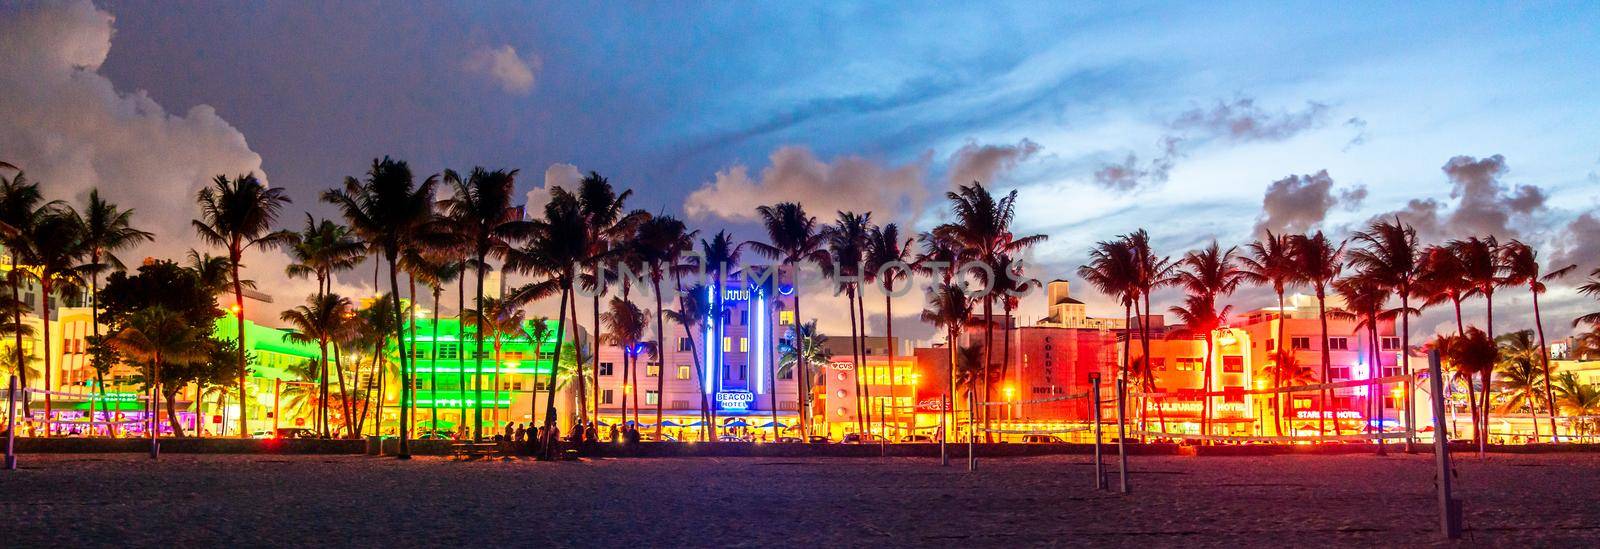 Miami Beach, USA - September 10, 2019: Ocean Drive hotels and restaurants at sunset. City skyline with palm trees at night. Art deco nightlife on South beach